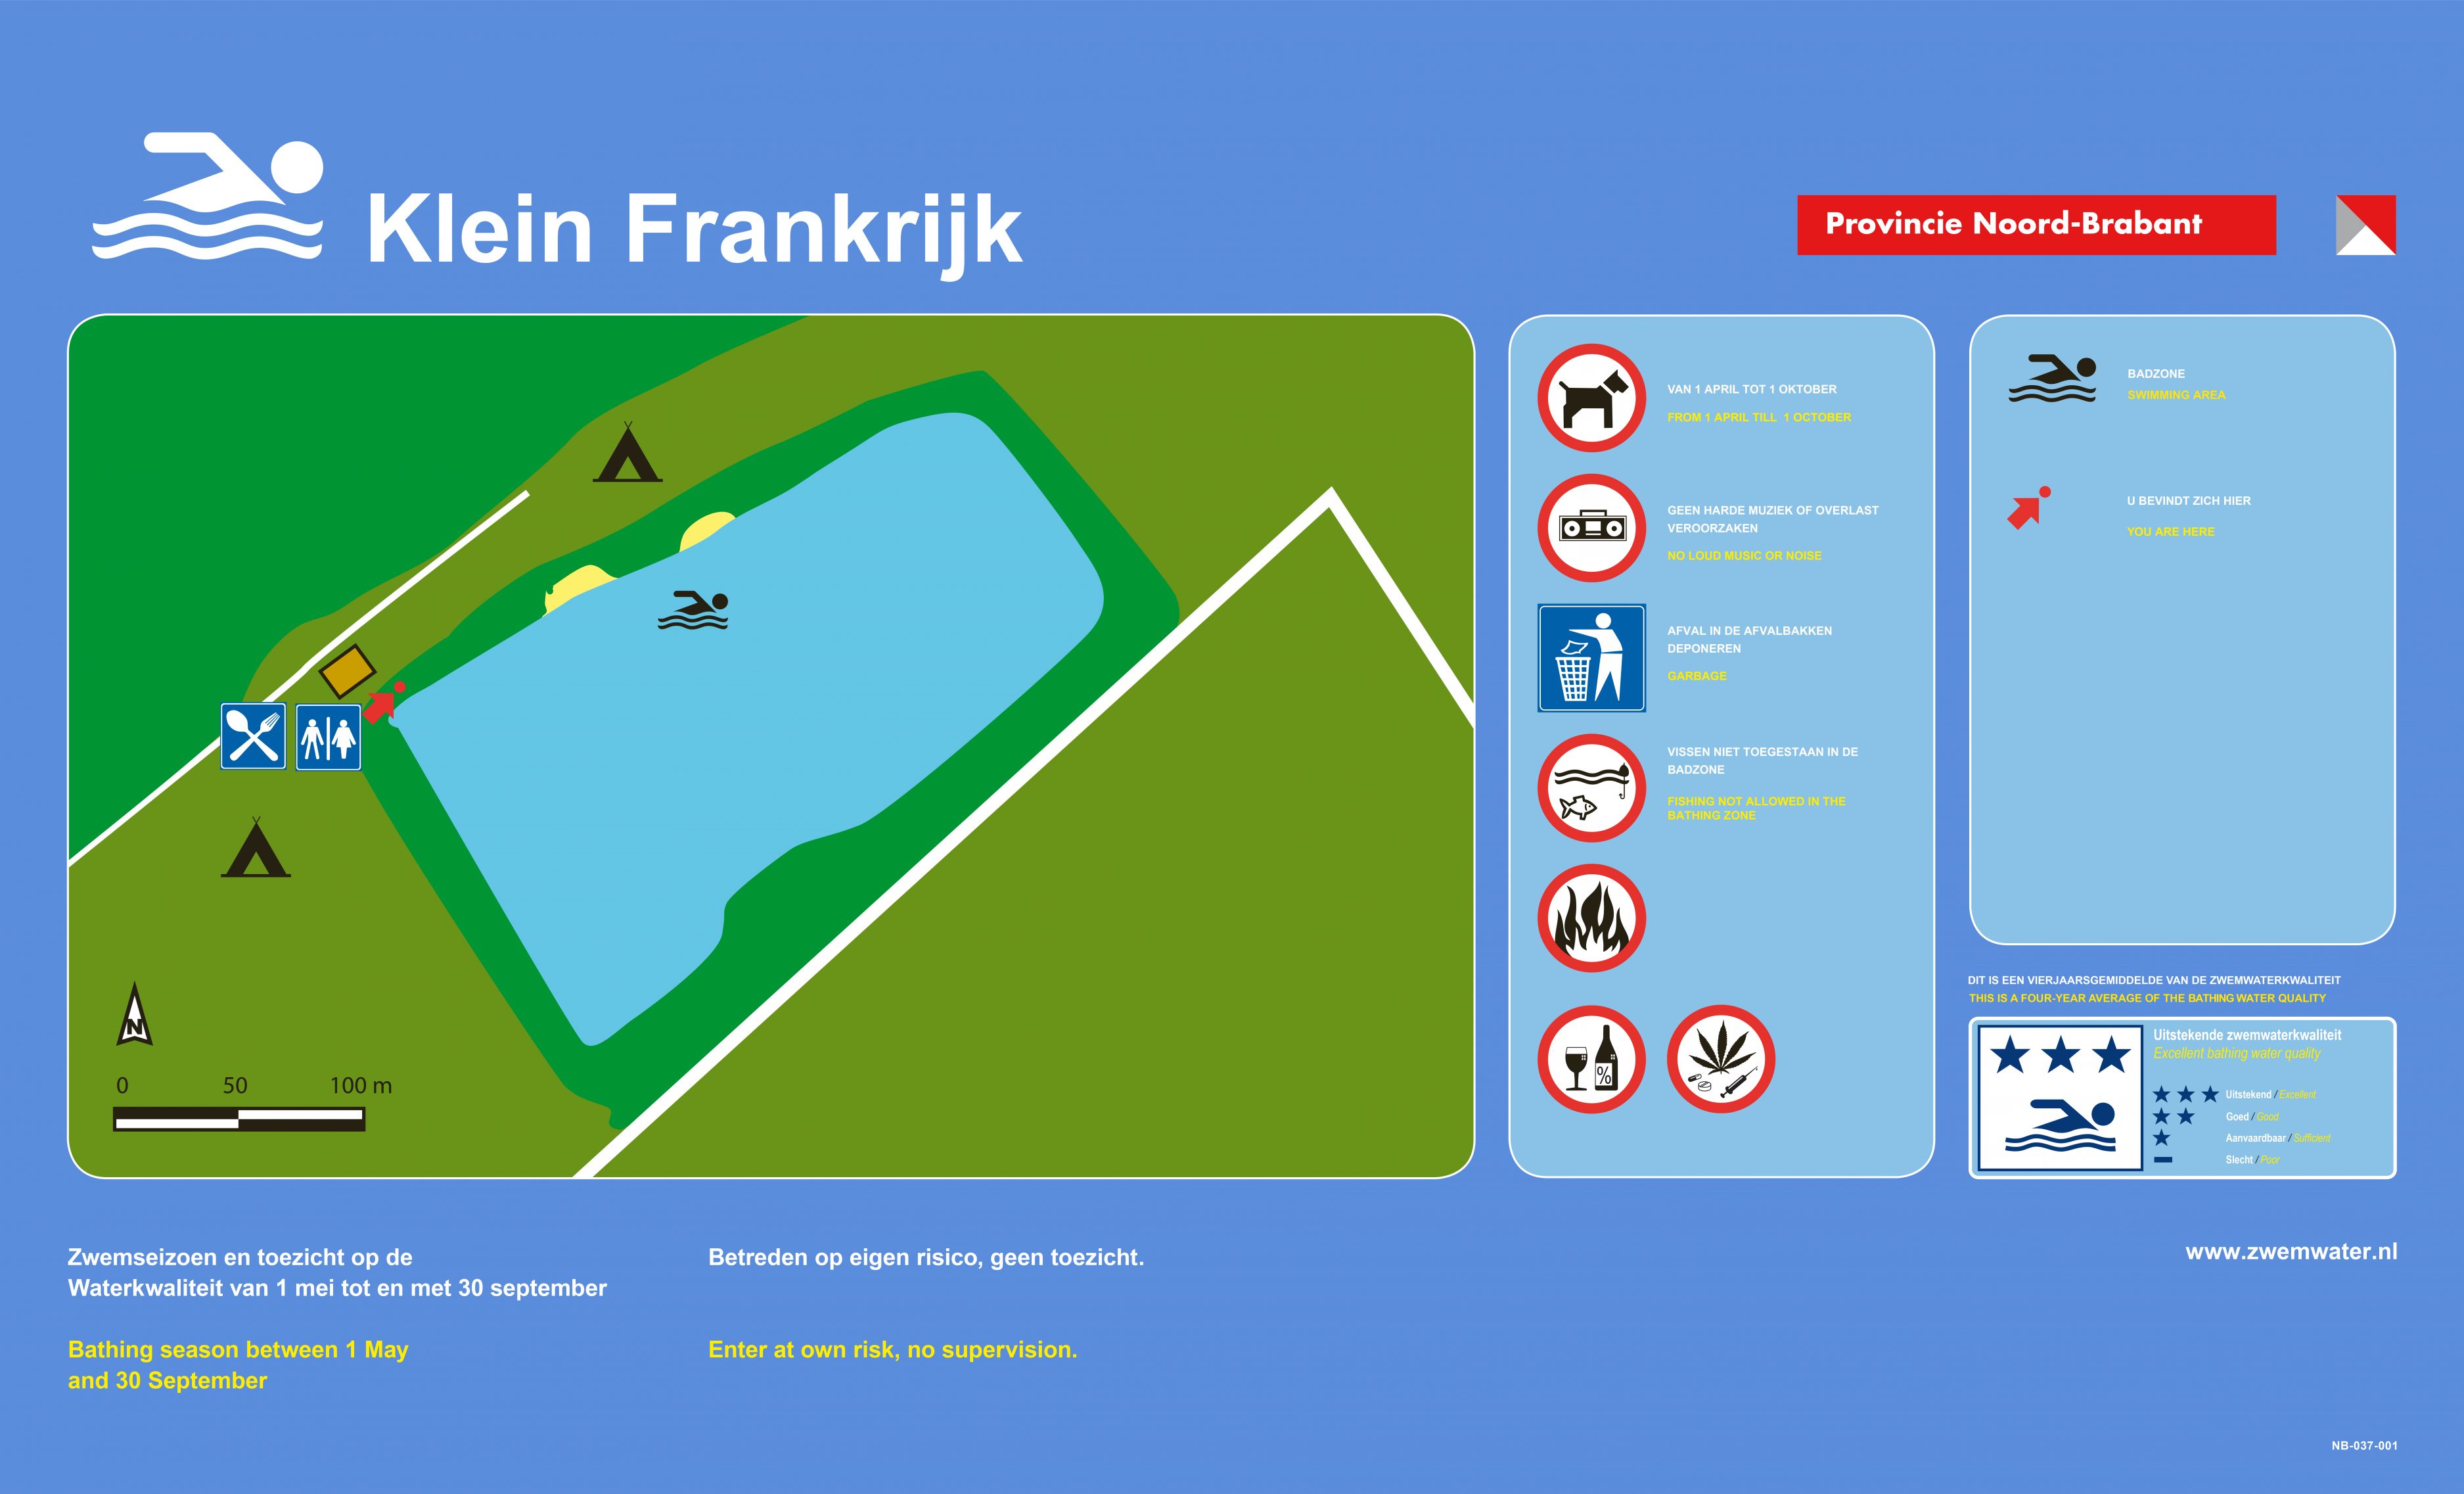 The information board at the swimming location Camping Klein Frankrijk